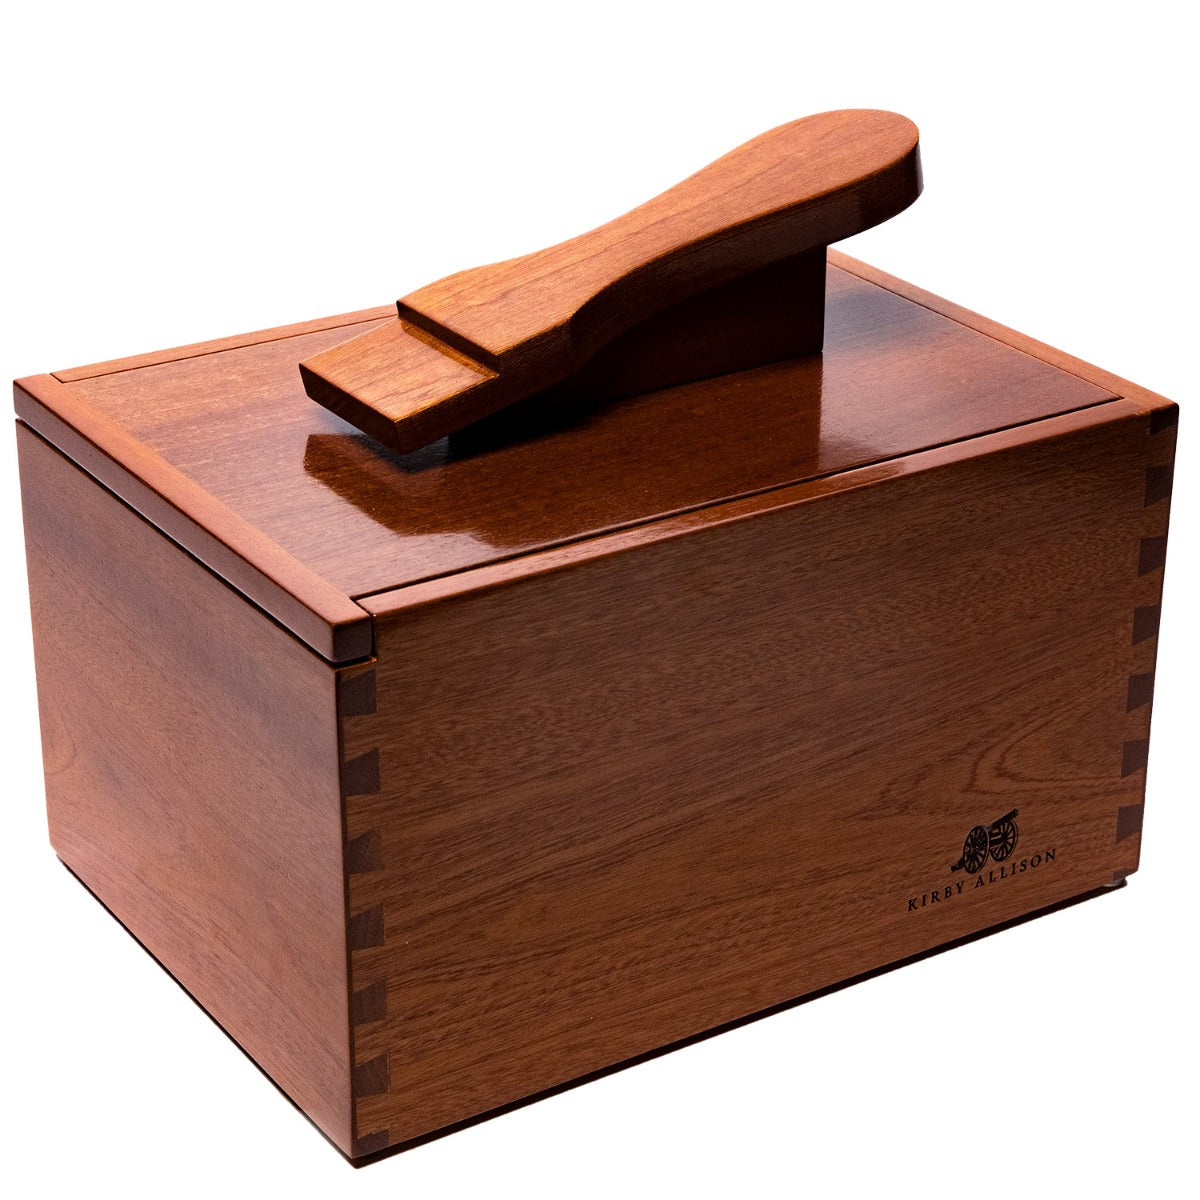 A handcrafted Deluxe Walnut Shoeshine Valet with a wooden handle, from KirbyAllison.com.